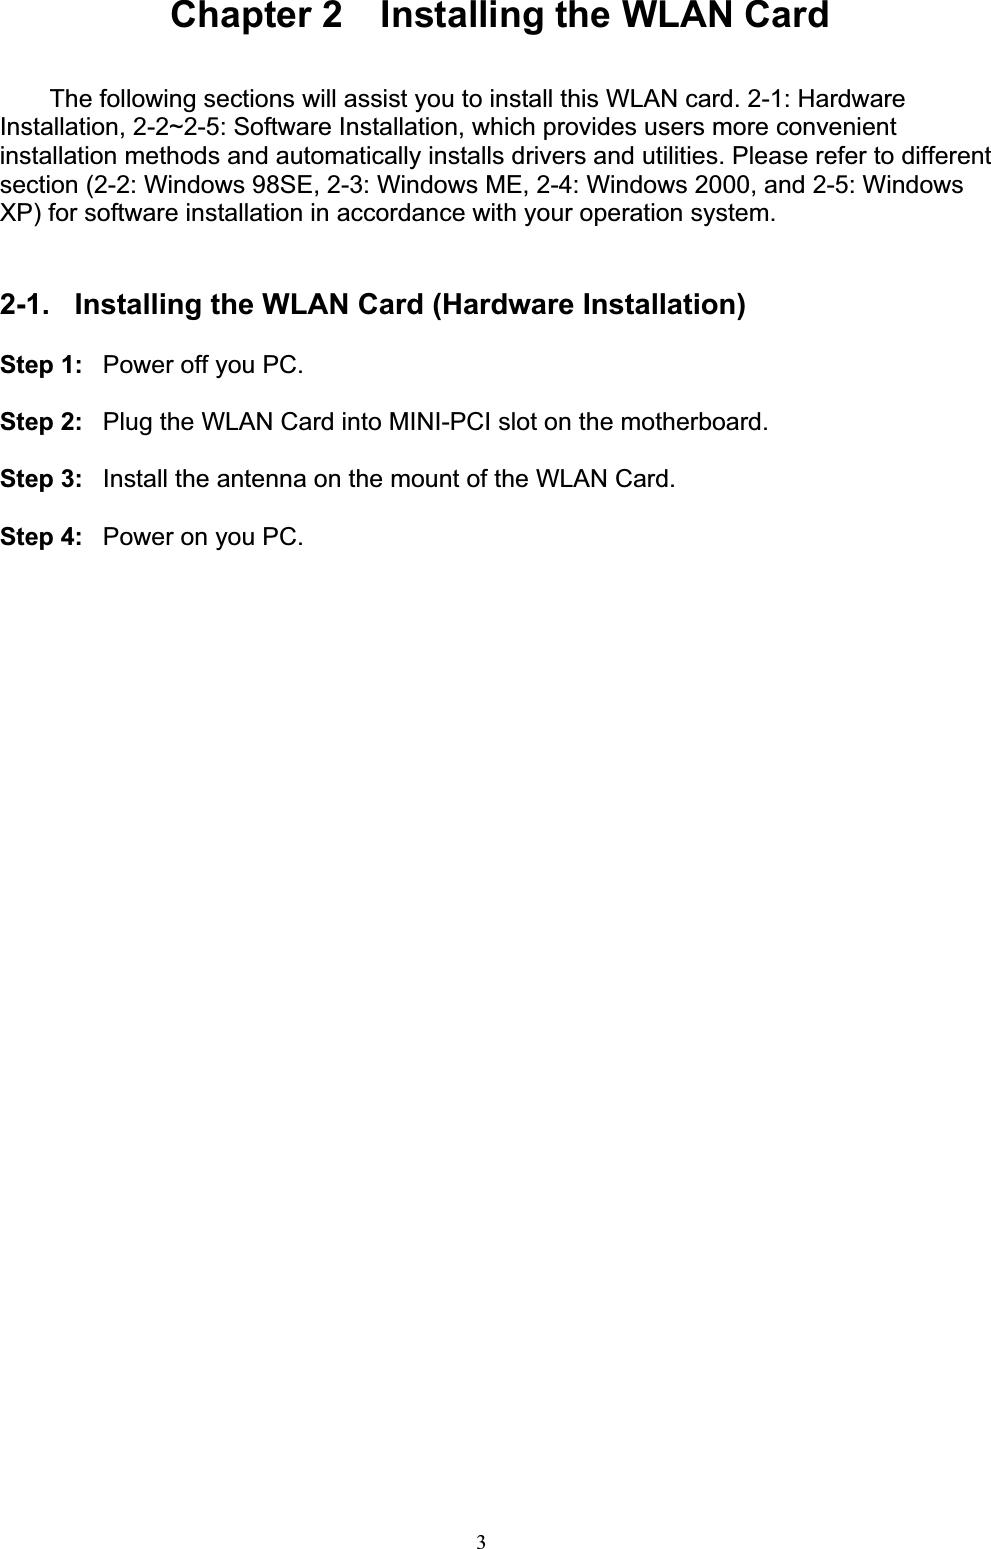 3Chapter 2    Installing the WLAN Card The following sections will assist you to install this WLAN card. 2-1: Hardware Installation, 2-2~2-5: Software Installation, which provides users more convenient installation methods and automatically installs drivers and utilities. Please refer to different section (2-2: Windows 98SE, 2-3: Windows ME, 2-4: Windows 2000, and 2-5: Windows XP) for software installation in accordance with your operation system. 2-1.  Installing the WLAN Card (Hardware Installation) Step 1:  Power off you PC. Step 2:  Plug the WLAN Card into MINI-PCI slot on the motherboard. Step 3:  Install the antenna on the mount of the WLAN Card. Step 4:  Power on you PC.